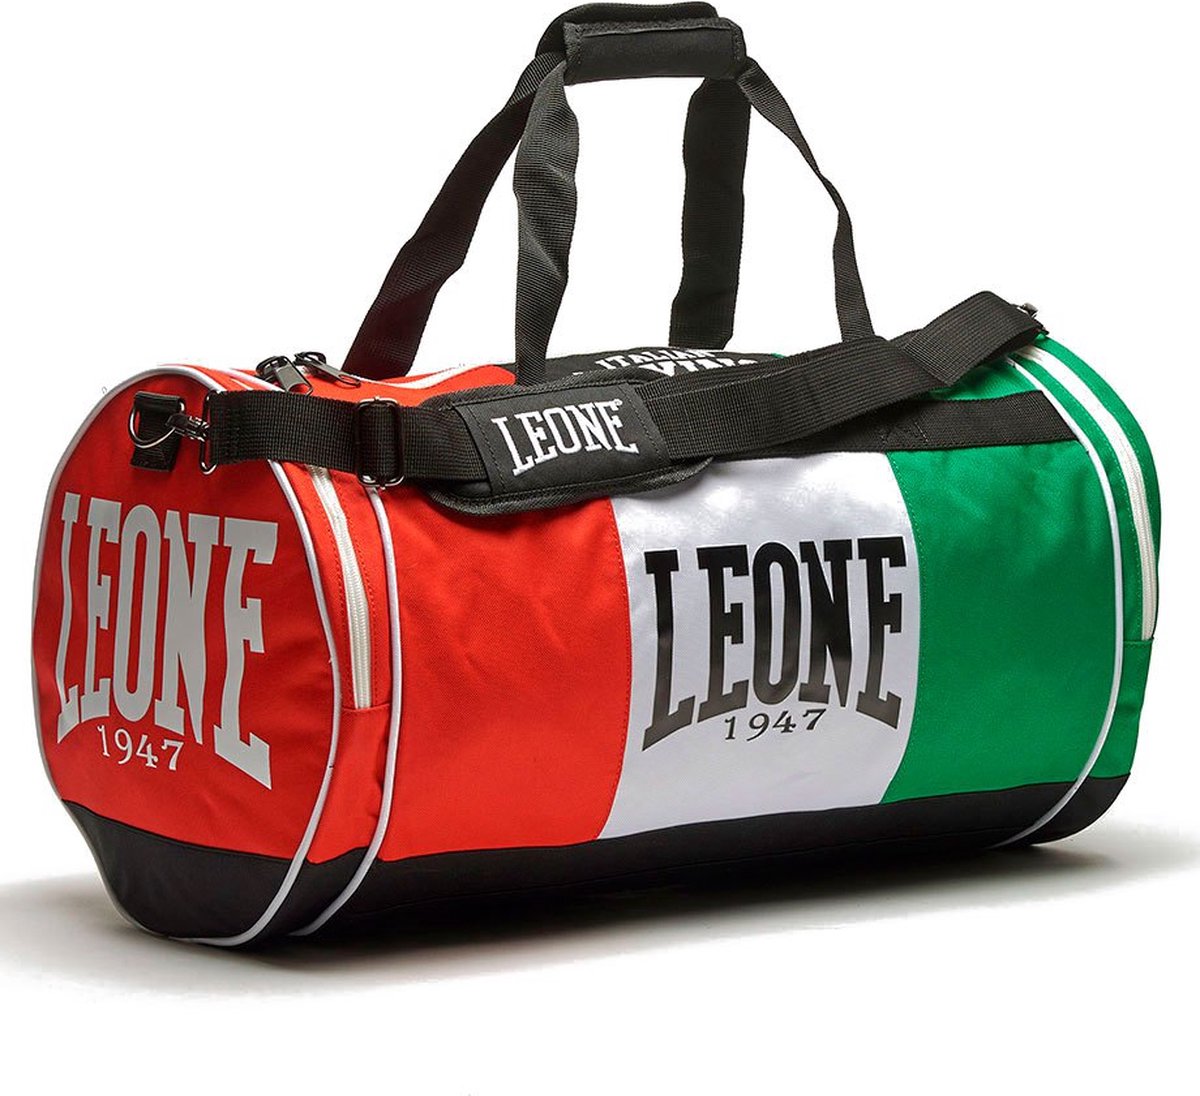 Leone1947 Italy 45l Groen,Rood,Wit